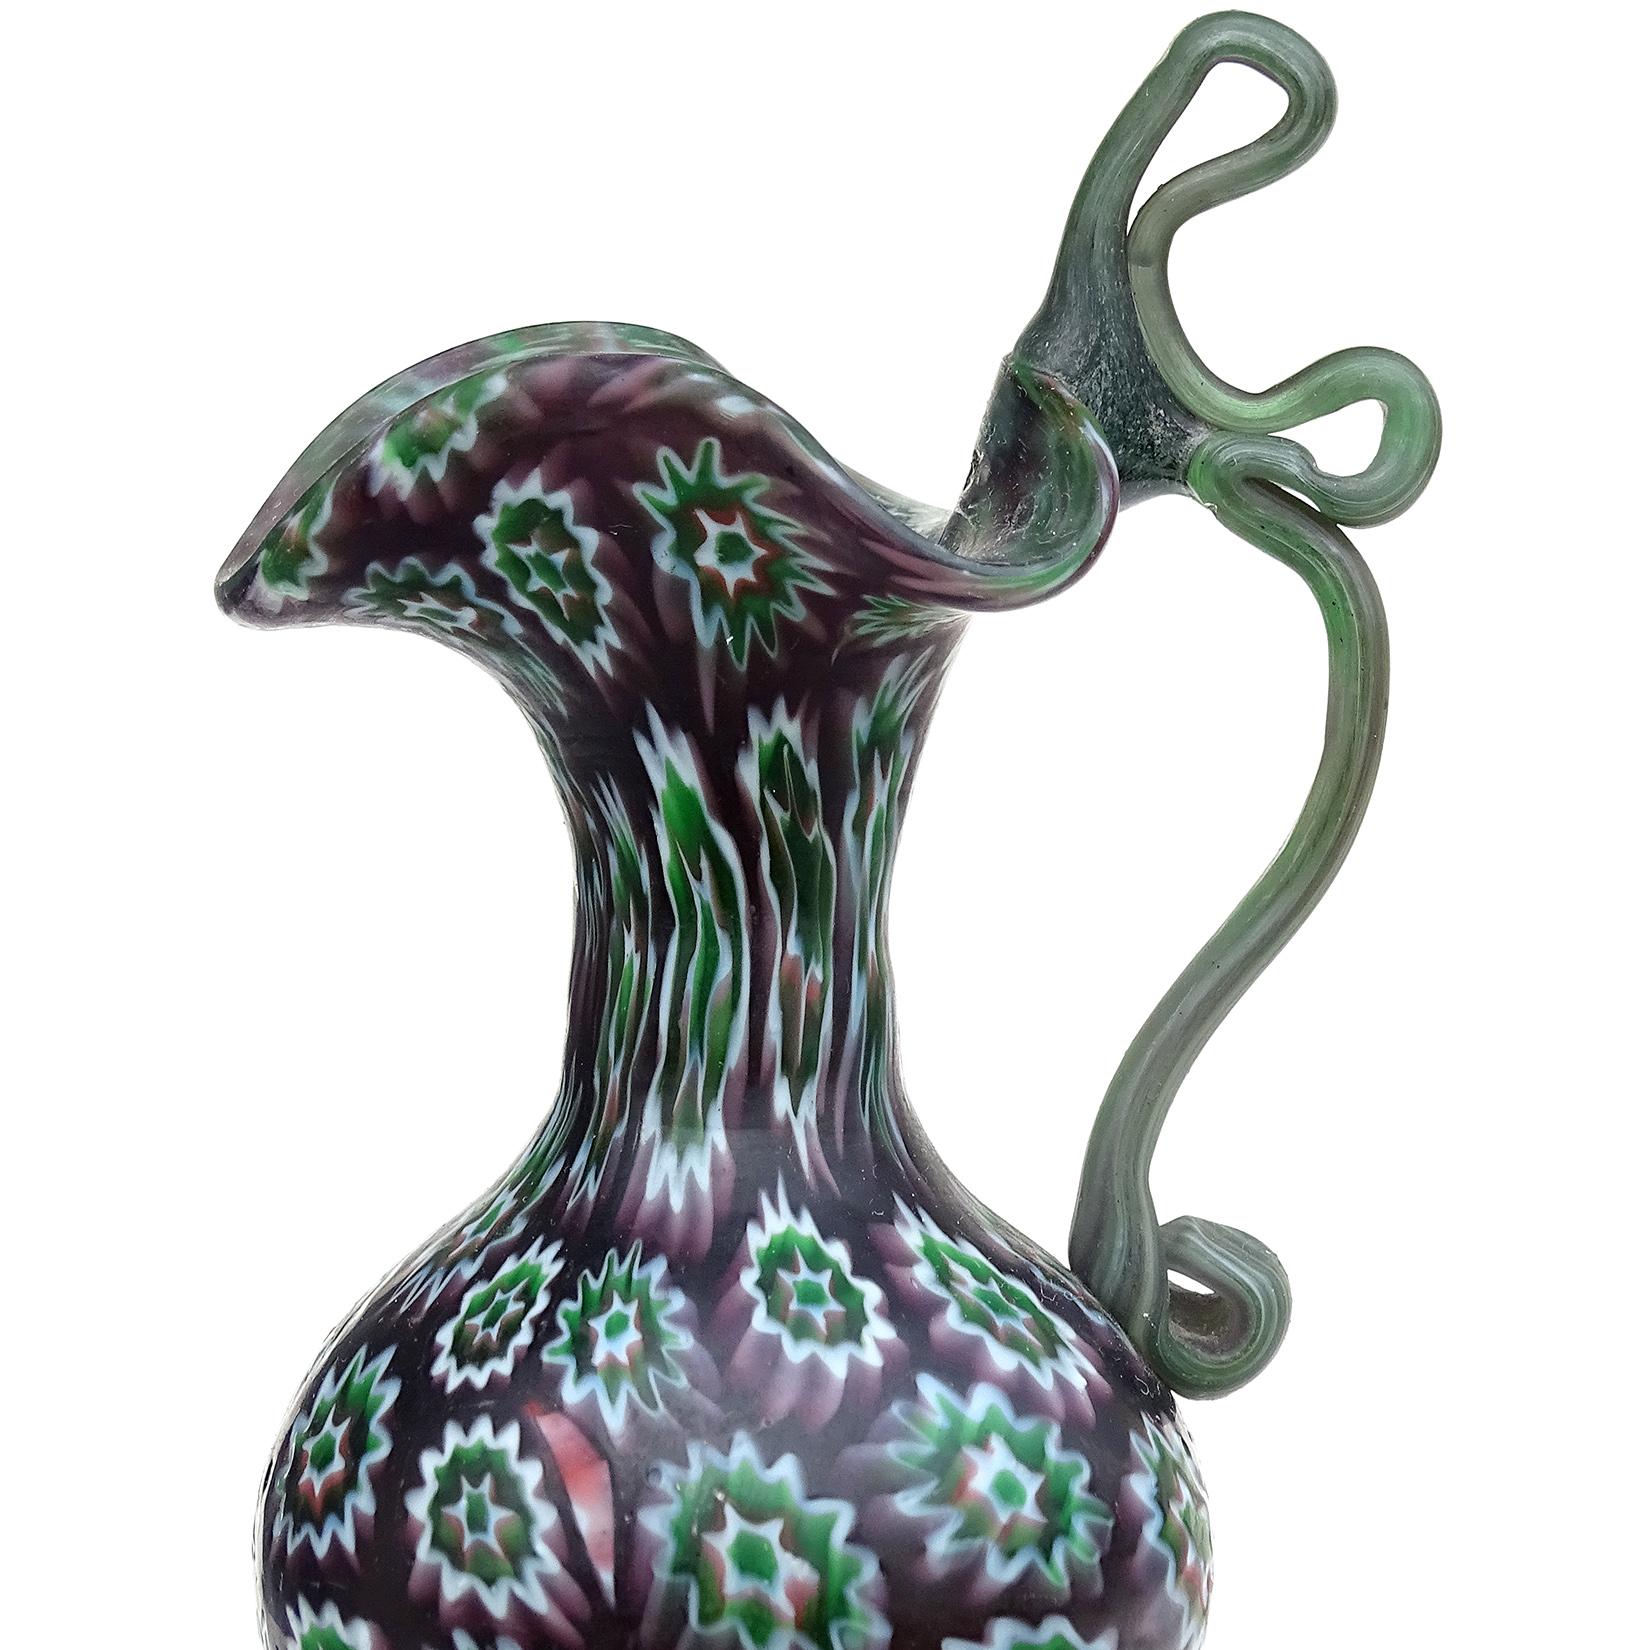 Beautiful antique Murano hand blown millefiori mosaic Italian art glass decorative cabinet vase. Documented to the Fratelli Toso Company, circa 1900-1910. Art Nouveau era. The vase has a dark and rich purple base color, with white, green and purple